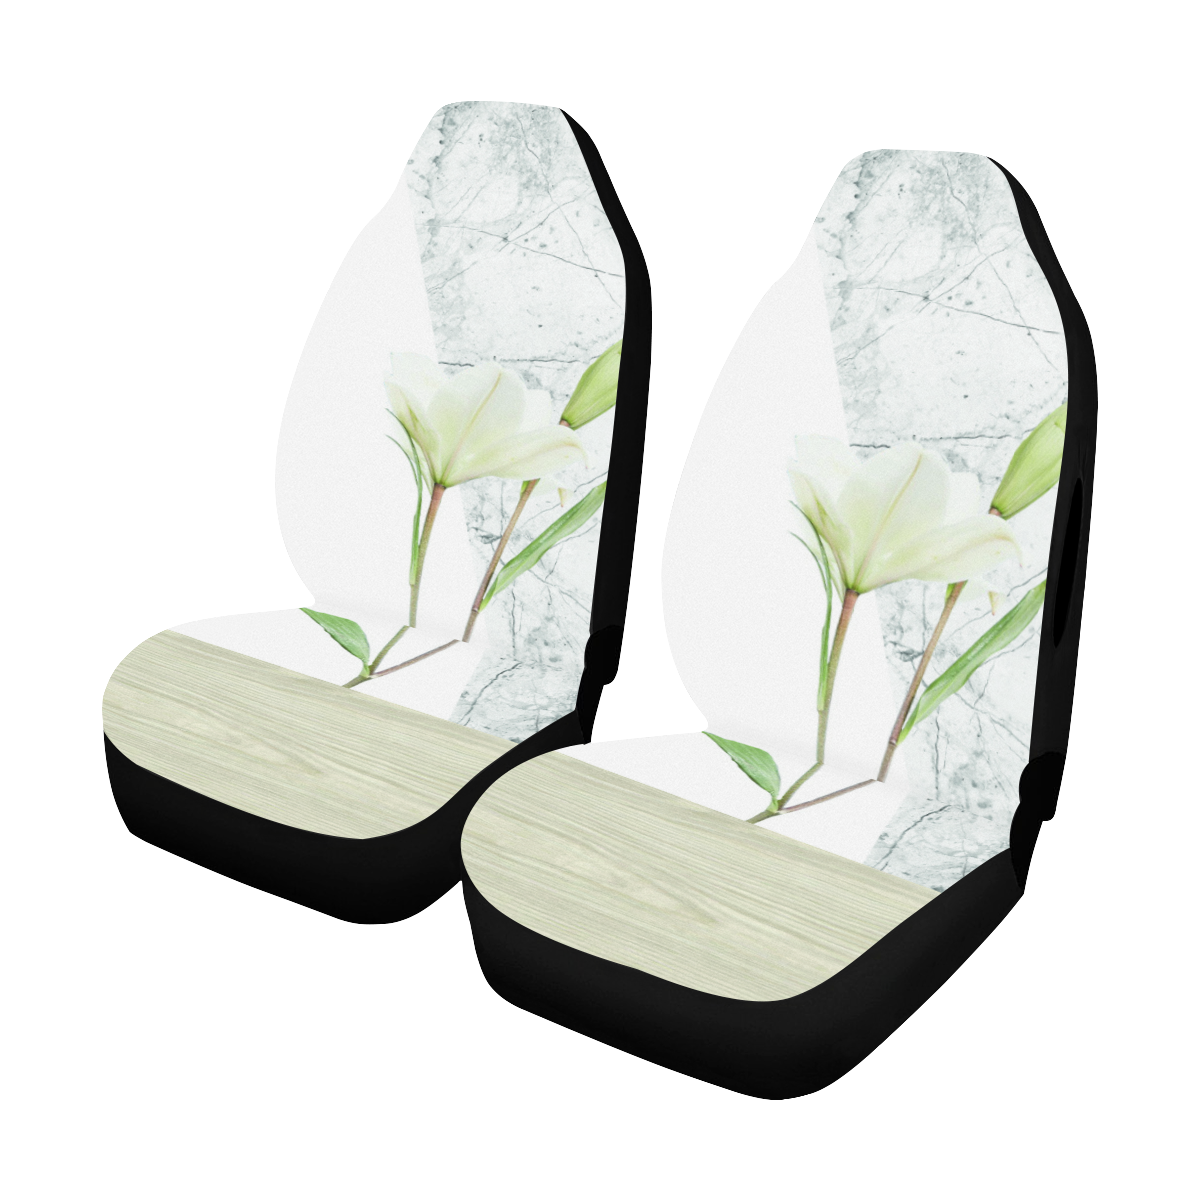 Flower Concrete Wood Design Car Seat Cover Airbag Compatible (Set of 2)